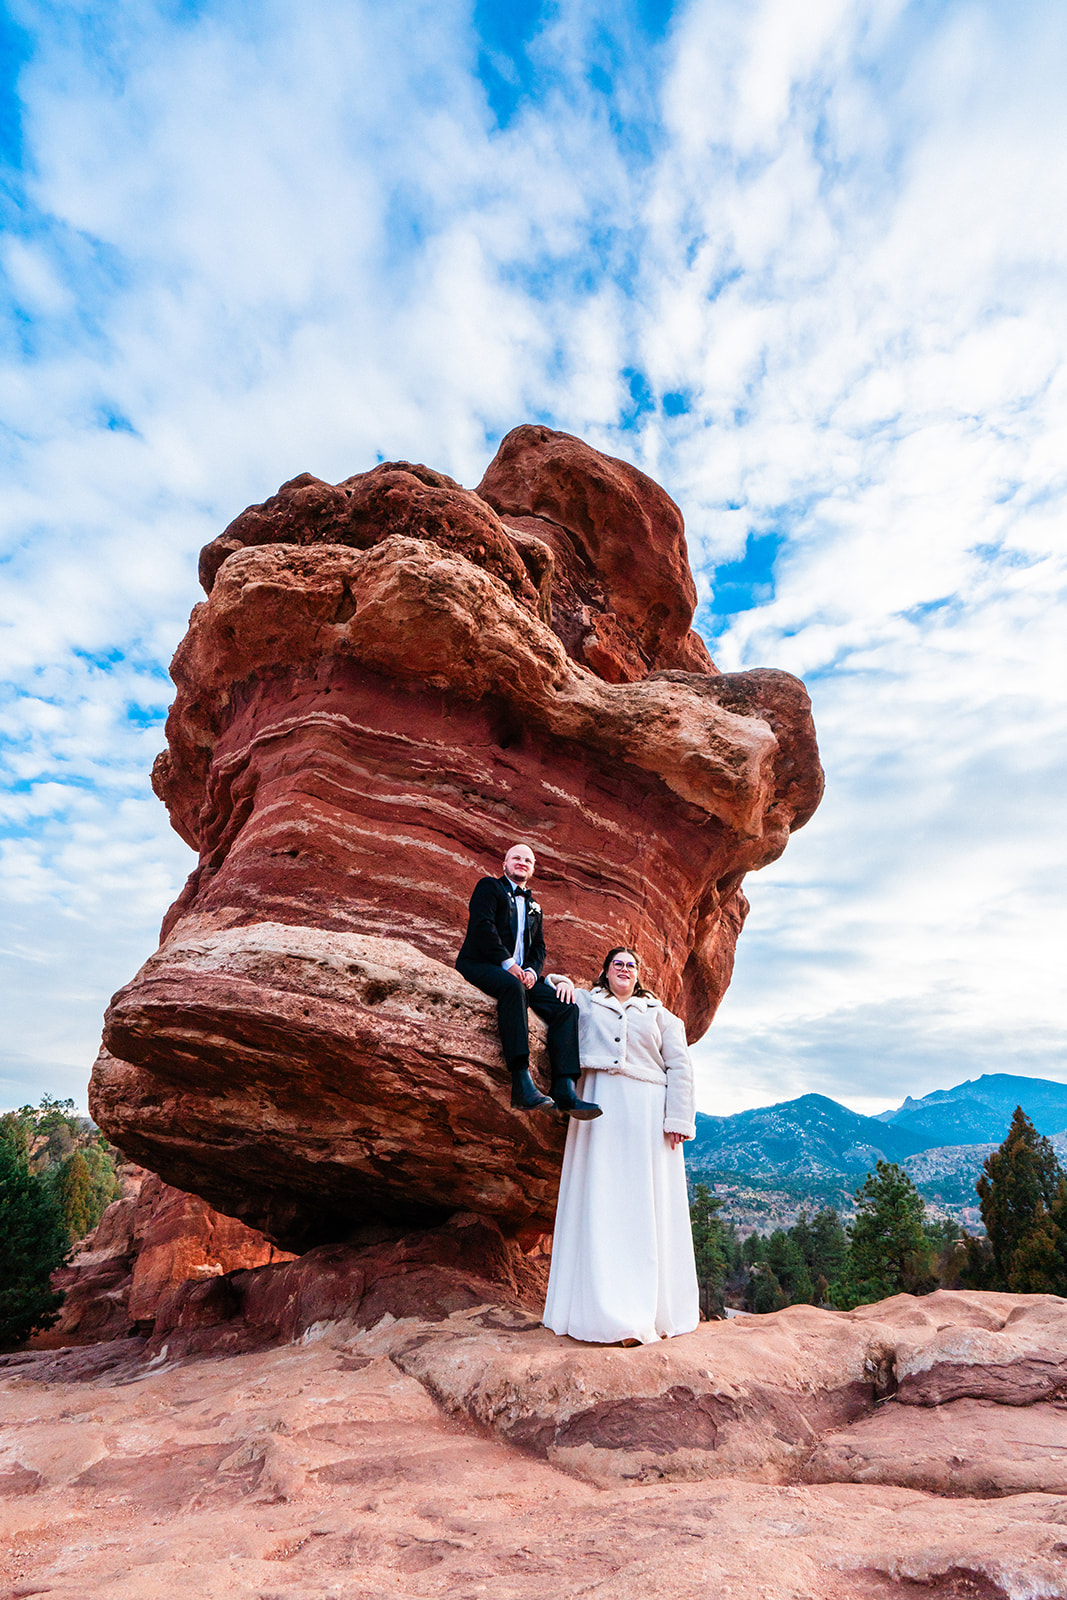 A bride and groom sit upon Balanced Rock during their Garden of the Gods elopement under a blue sky with white clouds.